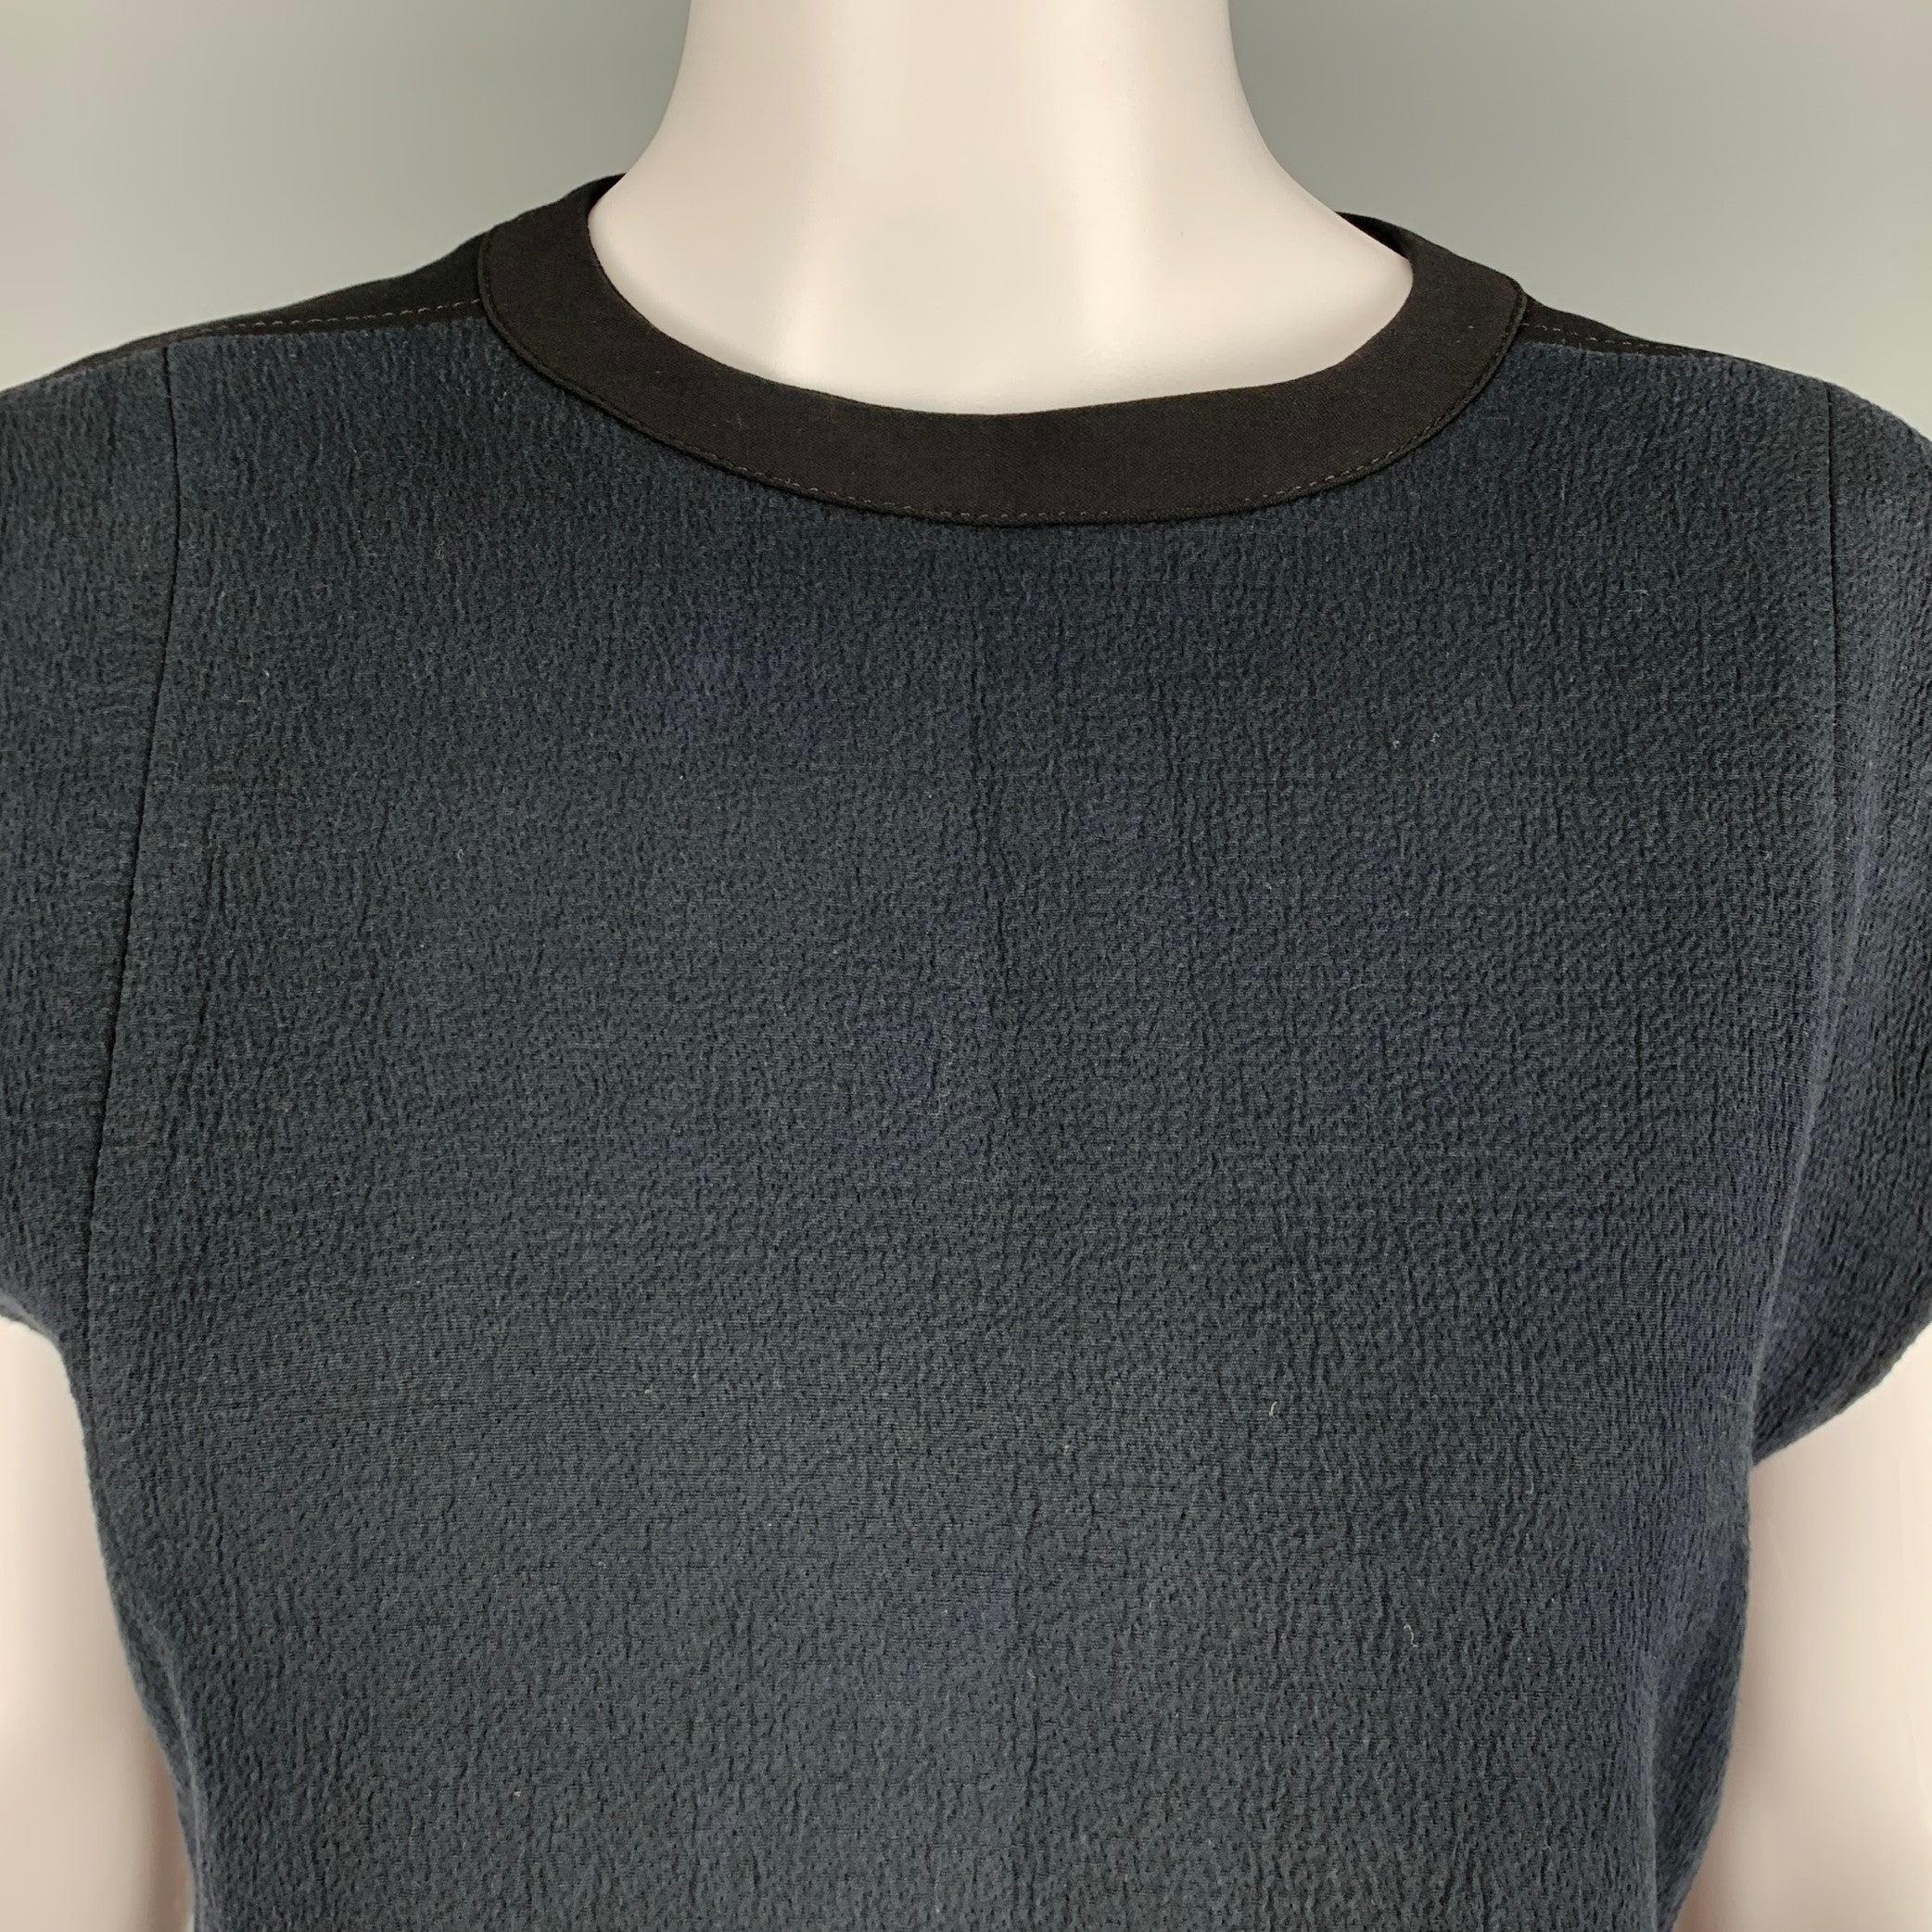 HELMUT LANG dress
in a black cotton wool blend fabric feautring a sleeveless style, textured design, single kangaroo pocket, and back zipper closure..Excellent Pre-Owned Condition. 

Marked:   4 

Measurements: 
 
Shoulder: 19 inches Bust: 37 inches